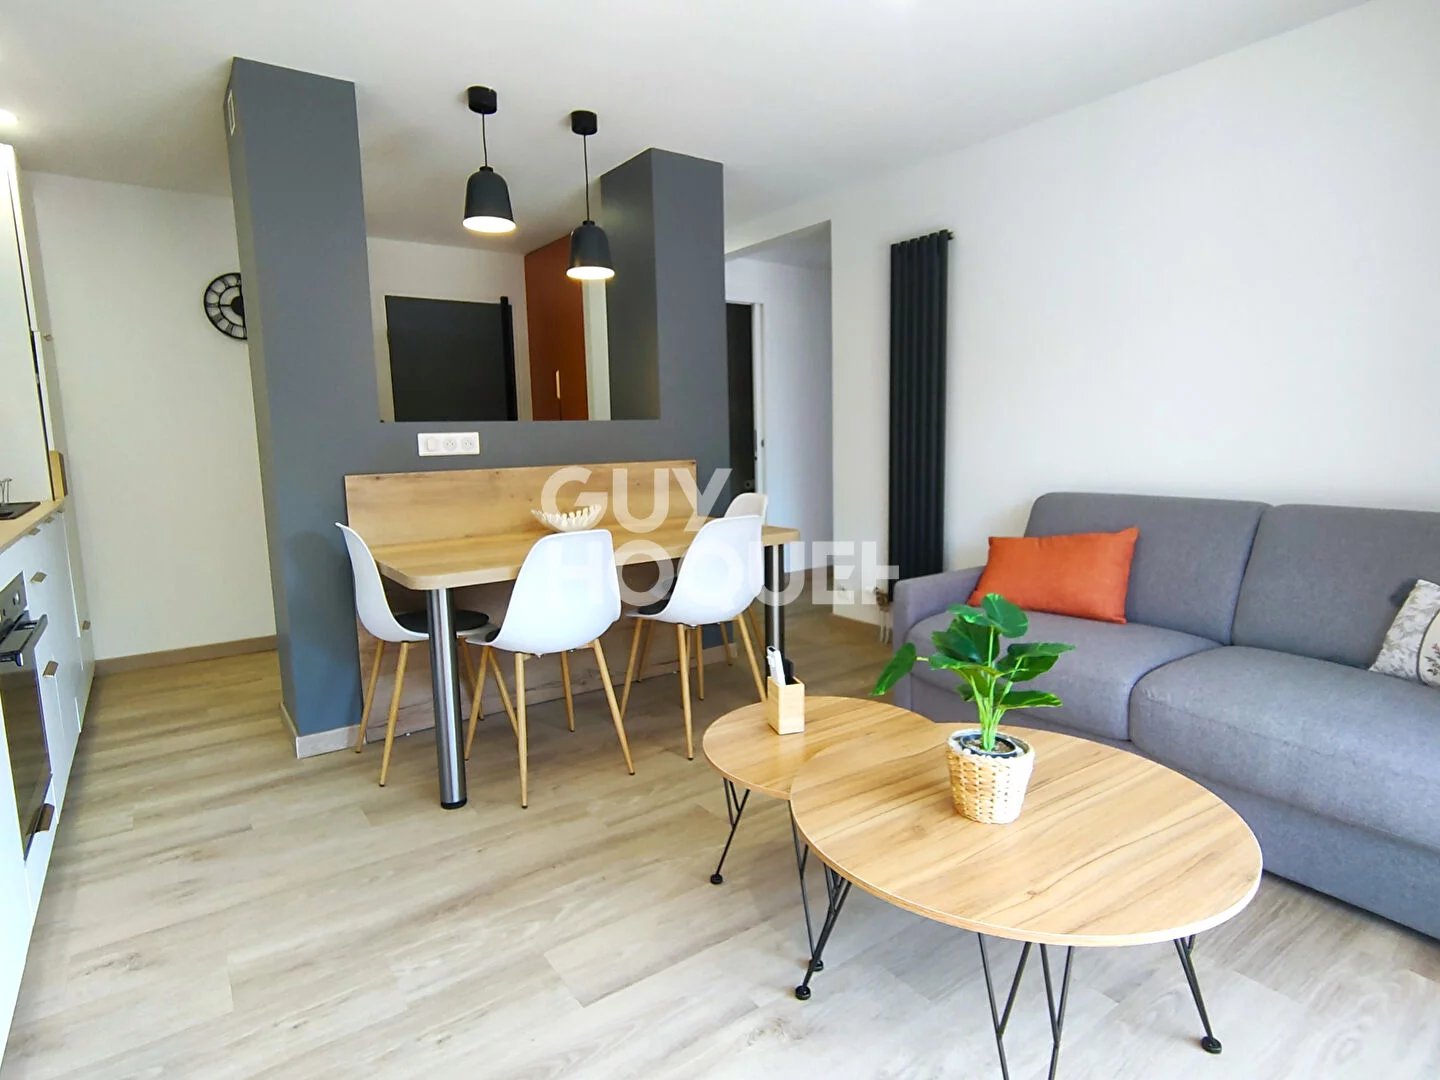 SUPERB FURNISHED 1 BEDROOM APARTMENT + BASEMENT BOX + SWIMMING POOL, CLOSE TO EVERYTHING ON FOOT (APARTMENT UNDER GLI READ THE ADVERTISING CAREFULLY THANK YOU)